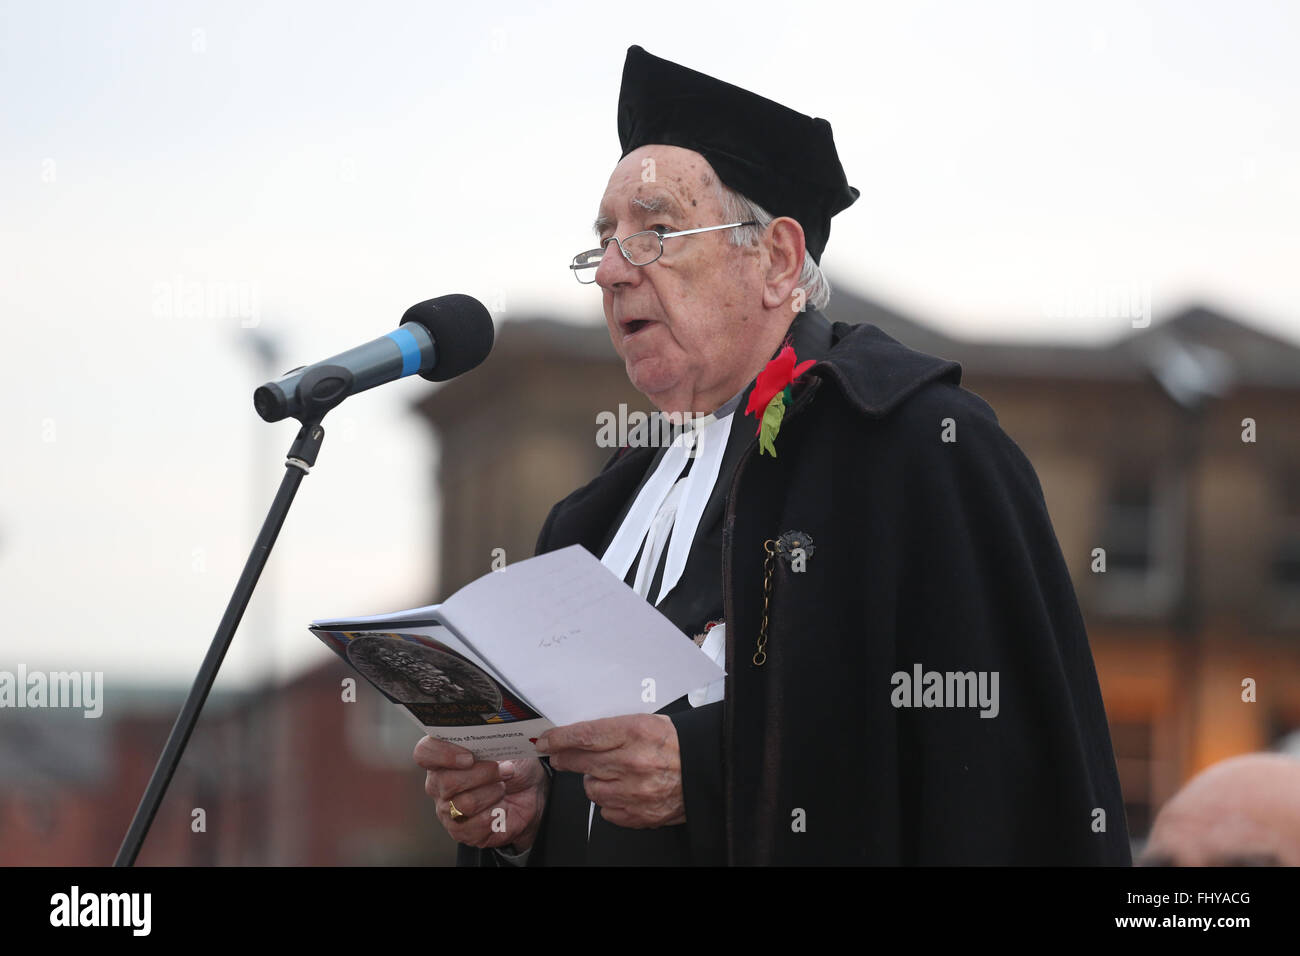 Rochdale, UK. 26th February, 2016. The Reverend Canon Alan Shackleton the Royal British Legion Chaplain leads a service of remembrance in Rochdale, UK 26th February 2016 Credit:  Barbara Cook/Alamy Live News Stock Photo